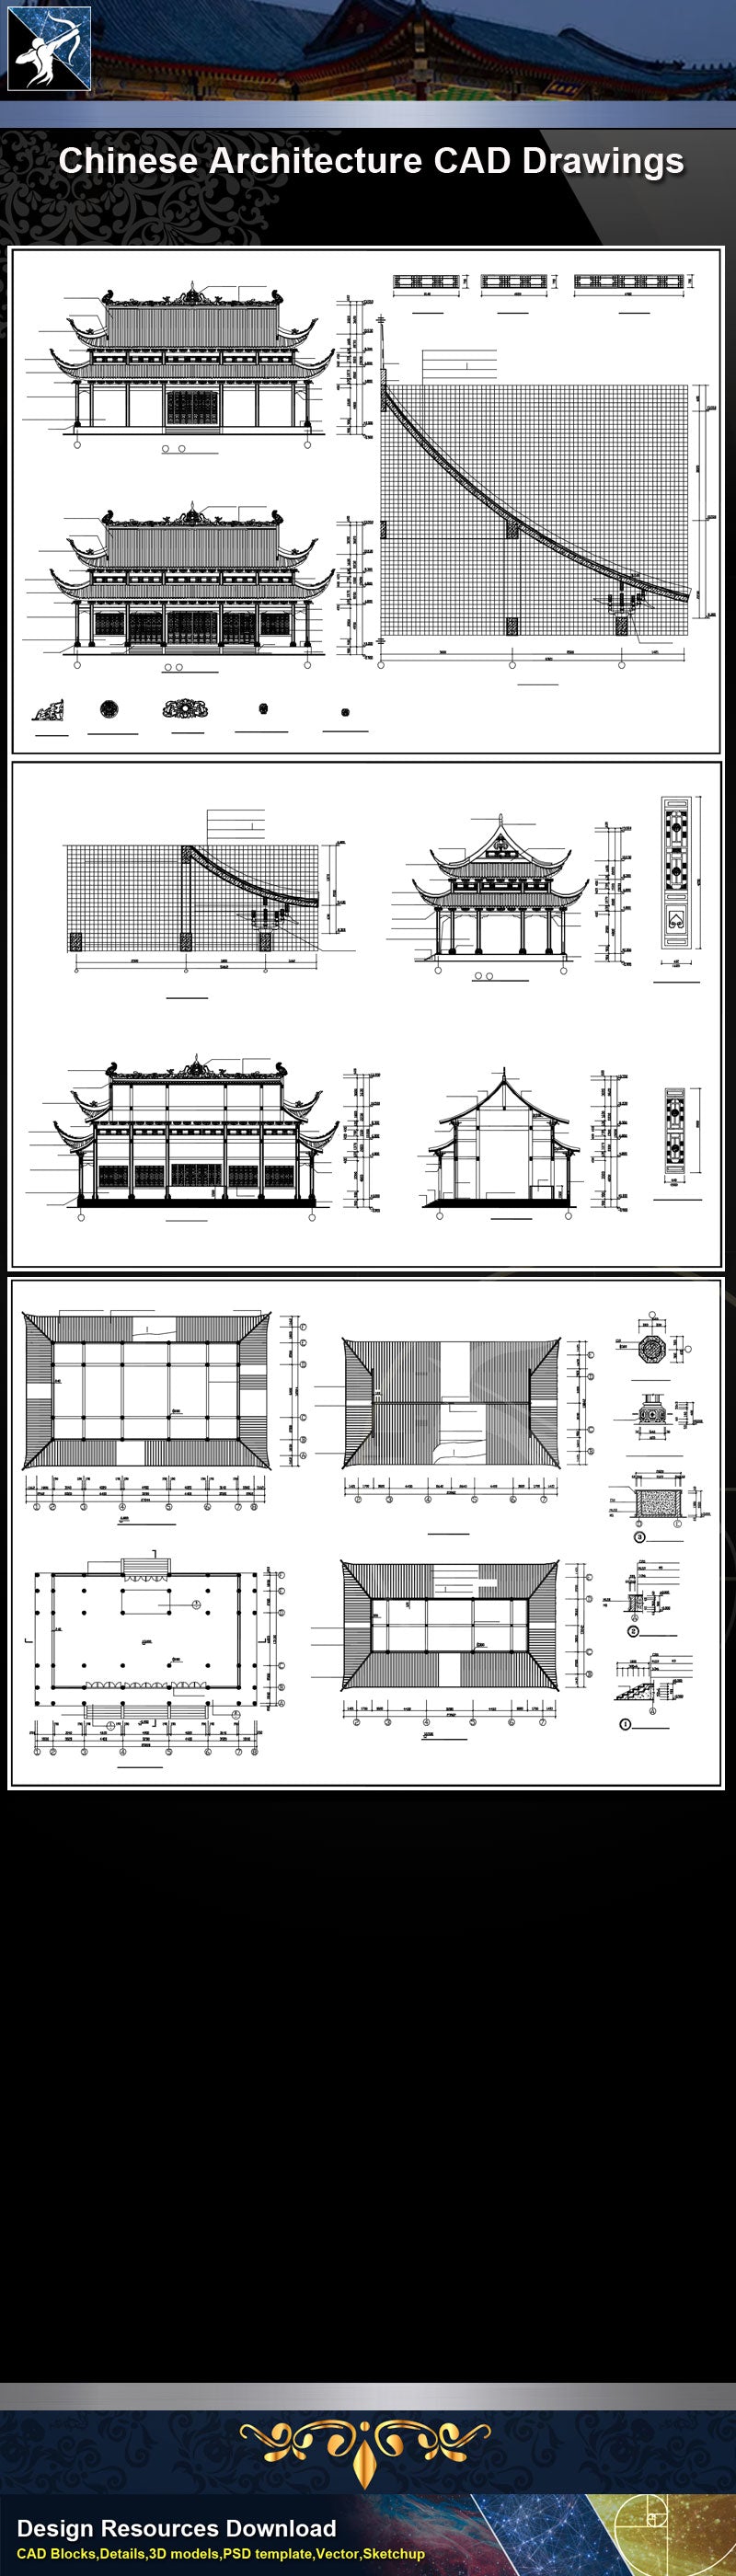 ★Chinese Architecture CAD Drawings-Grand Hall of Chinese Temple